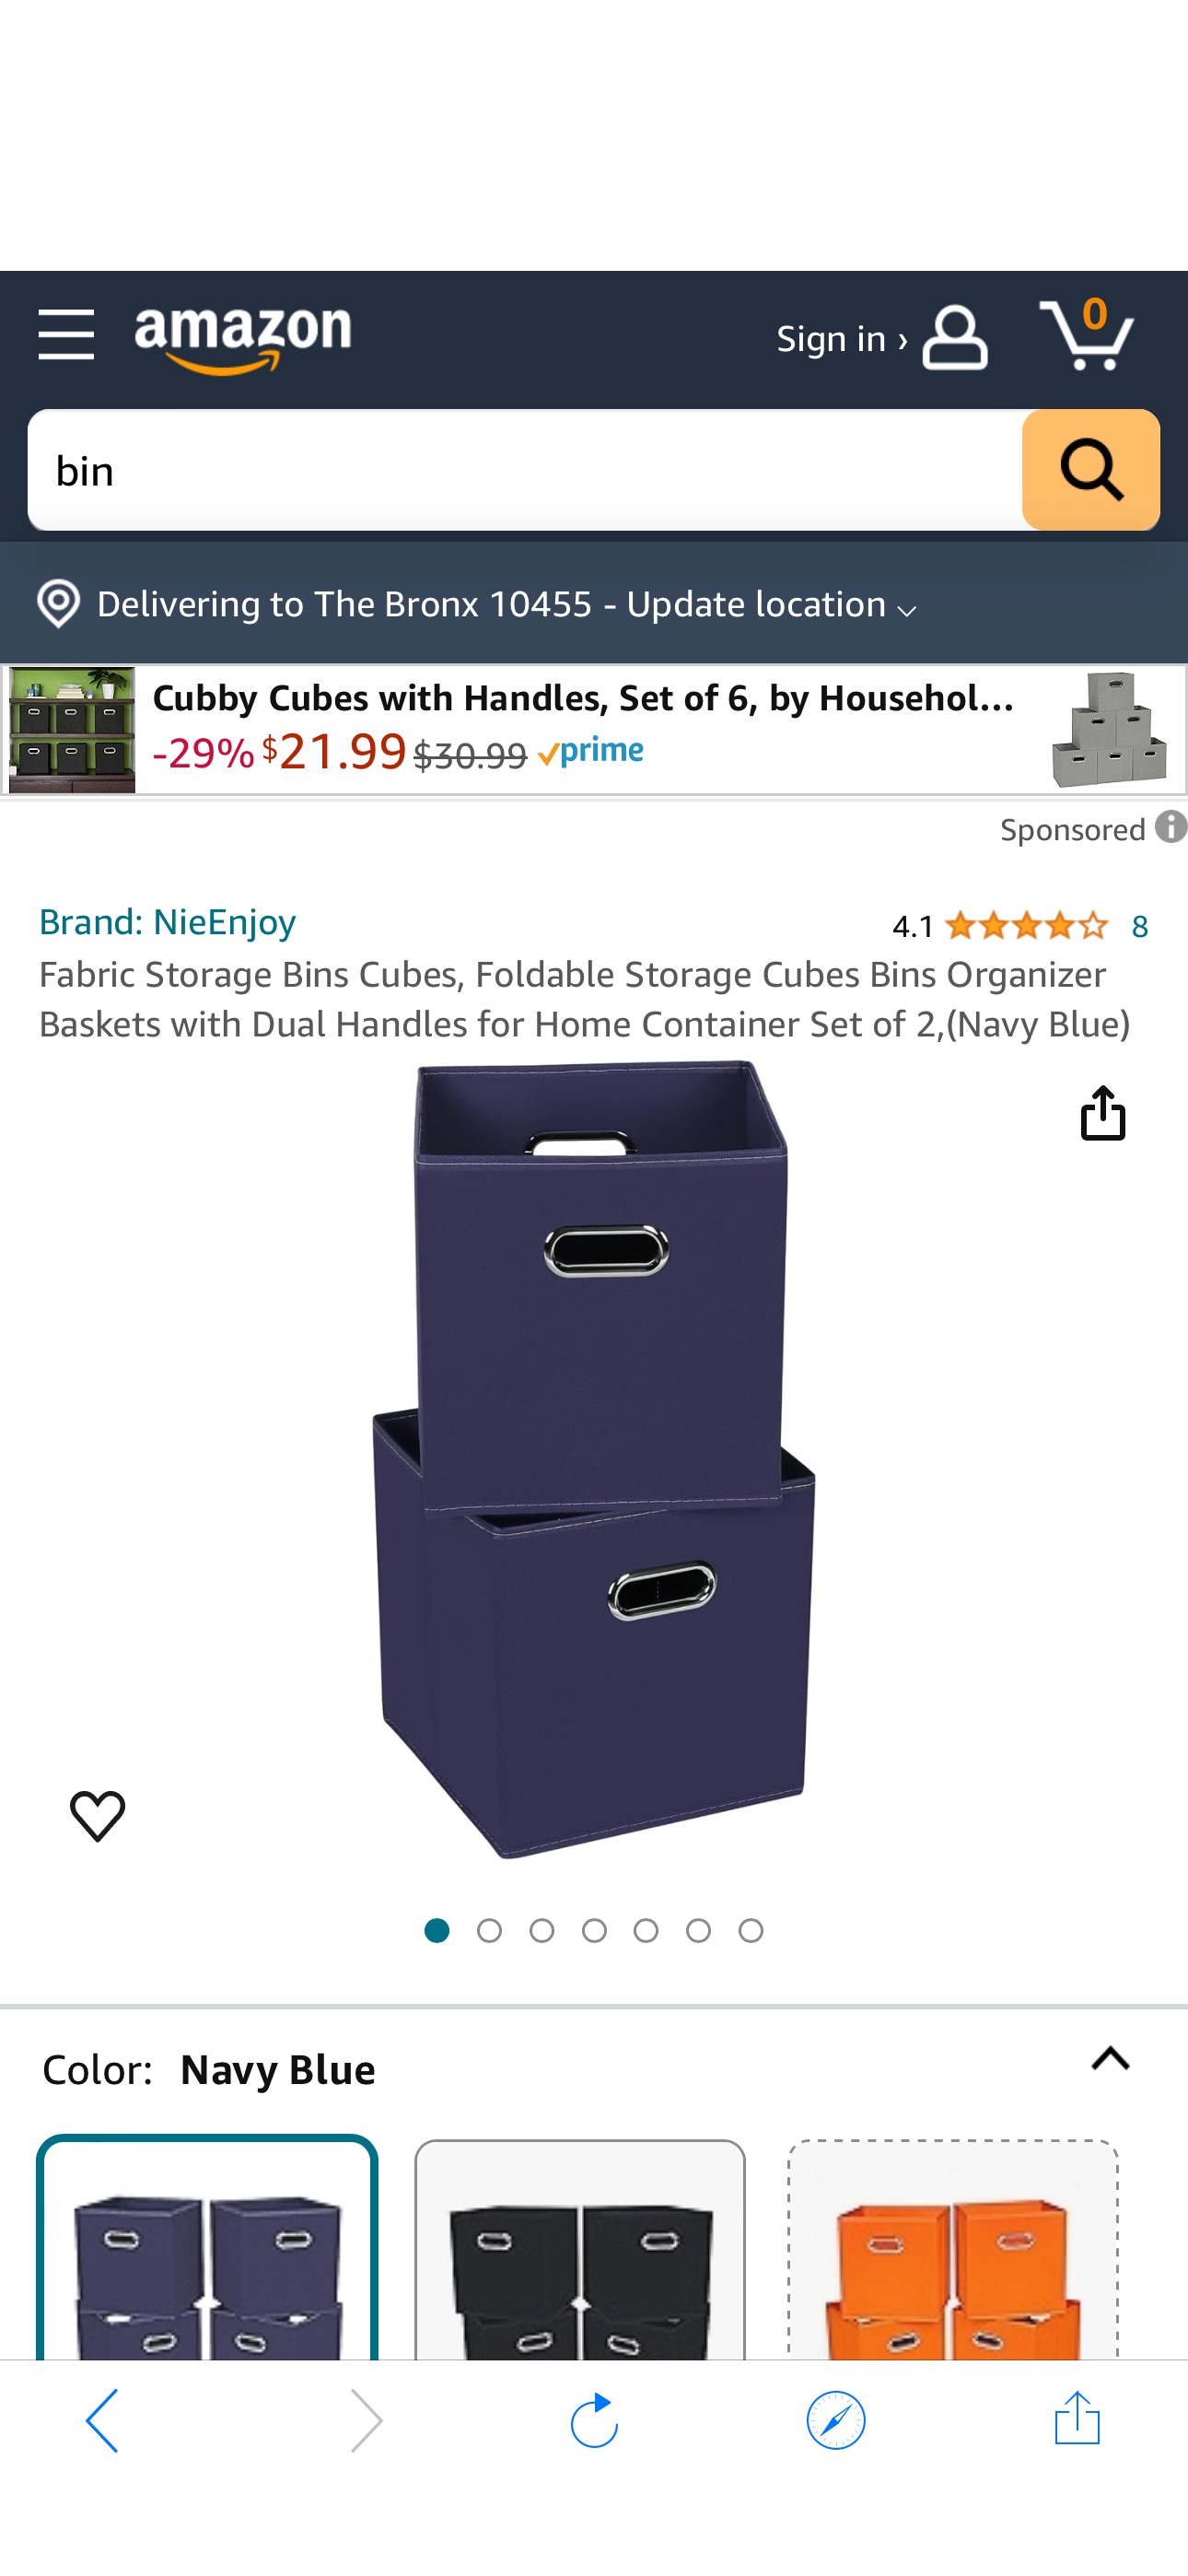 Amazon.com: NieEnjoy Fabric Storage Bins Cubes, Foldable Storage Cubes Bins Organizer Baskets with Dual Handles for Home Container Set of 2,(Navy Blue) : Home & Kitchen